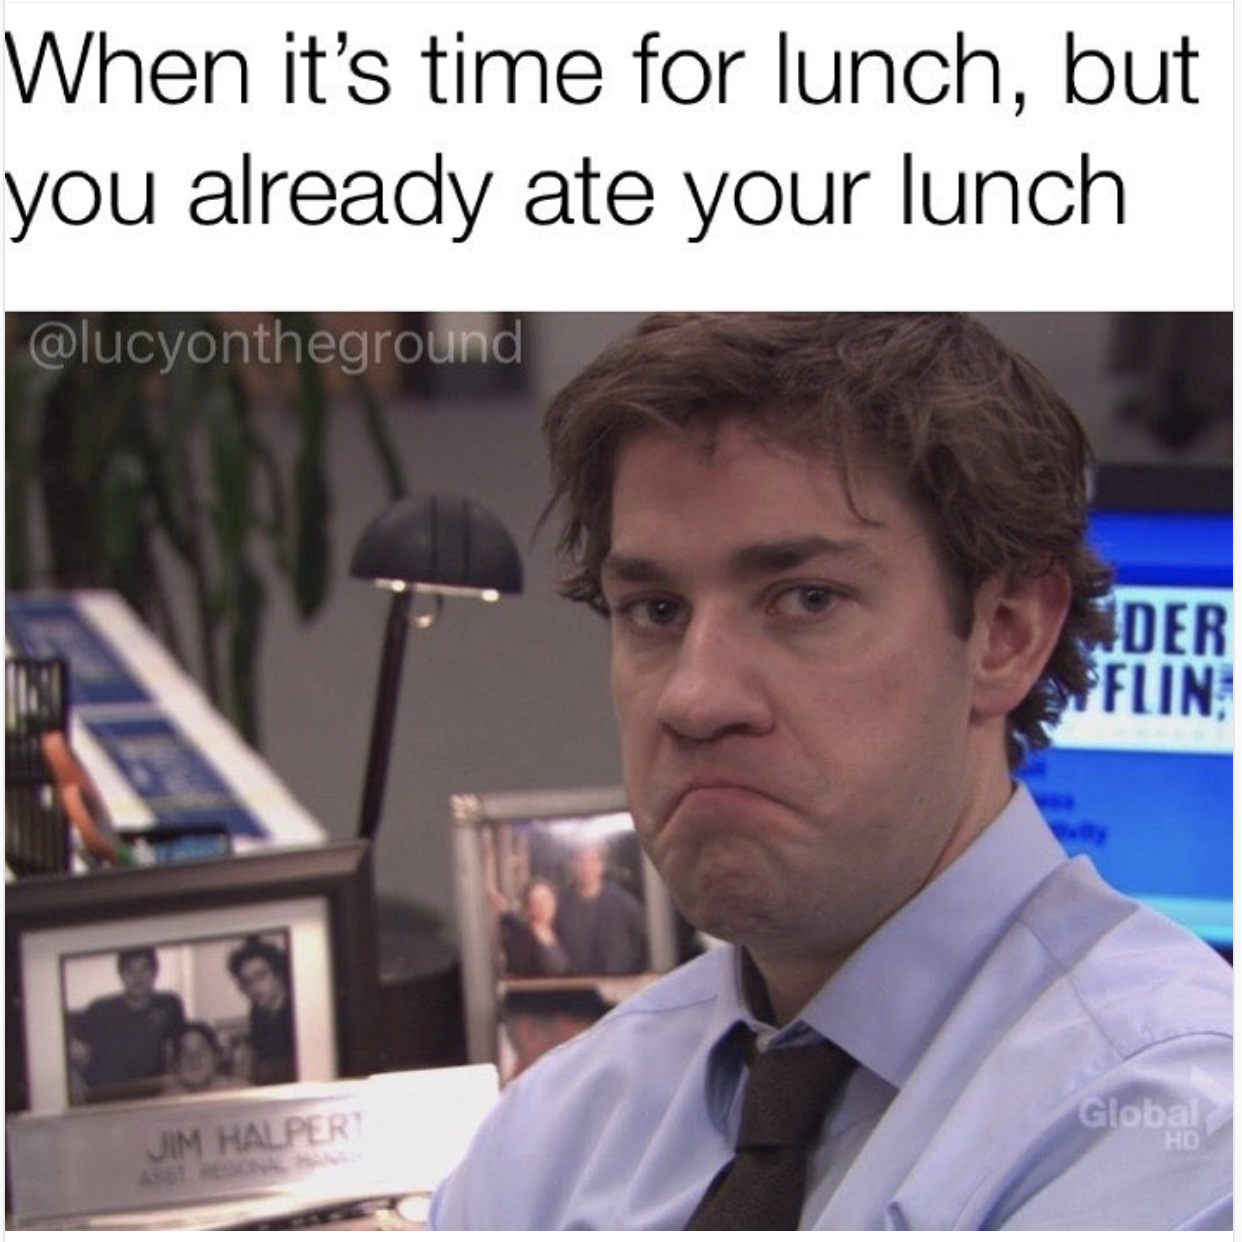 funny office memes - When it's time for lunch, but you already ate your lunch Wder Affun Global Jim Halp